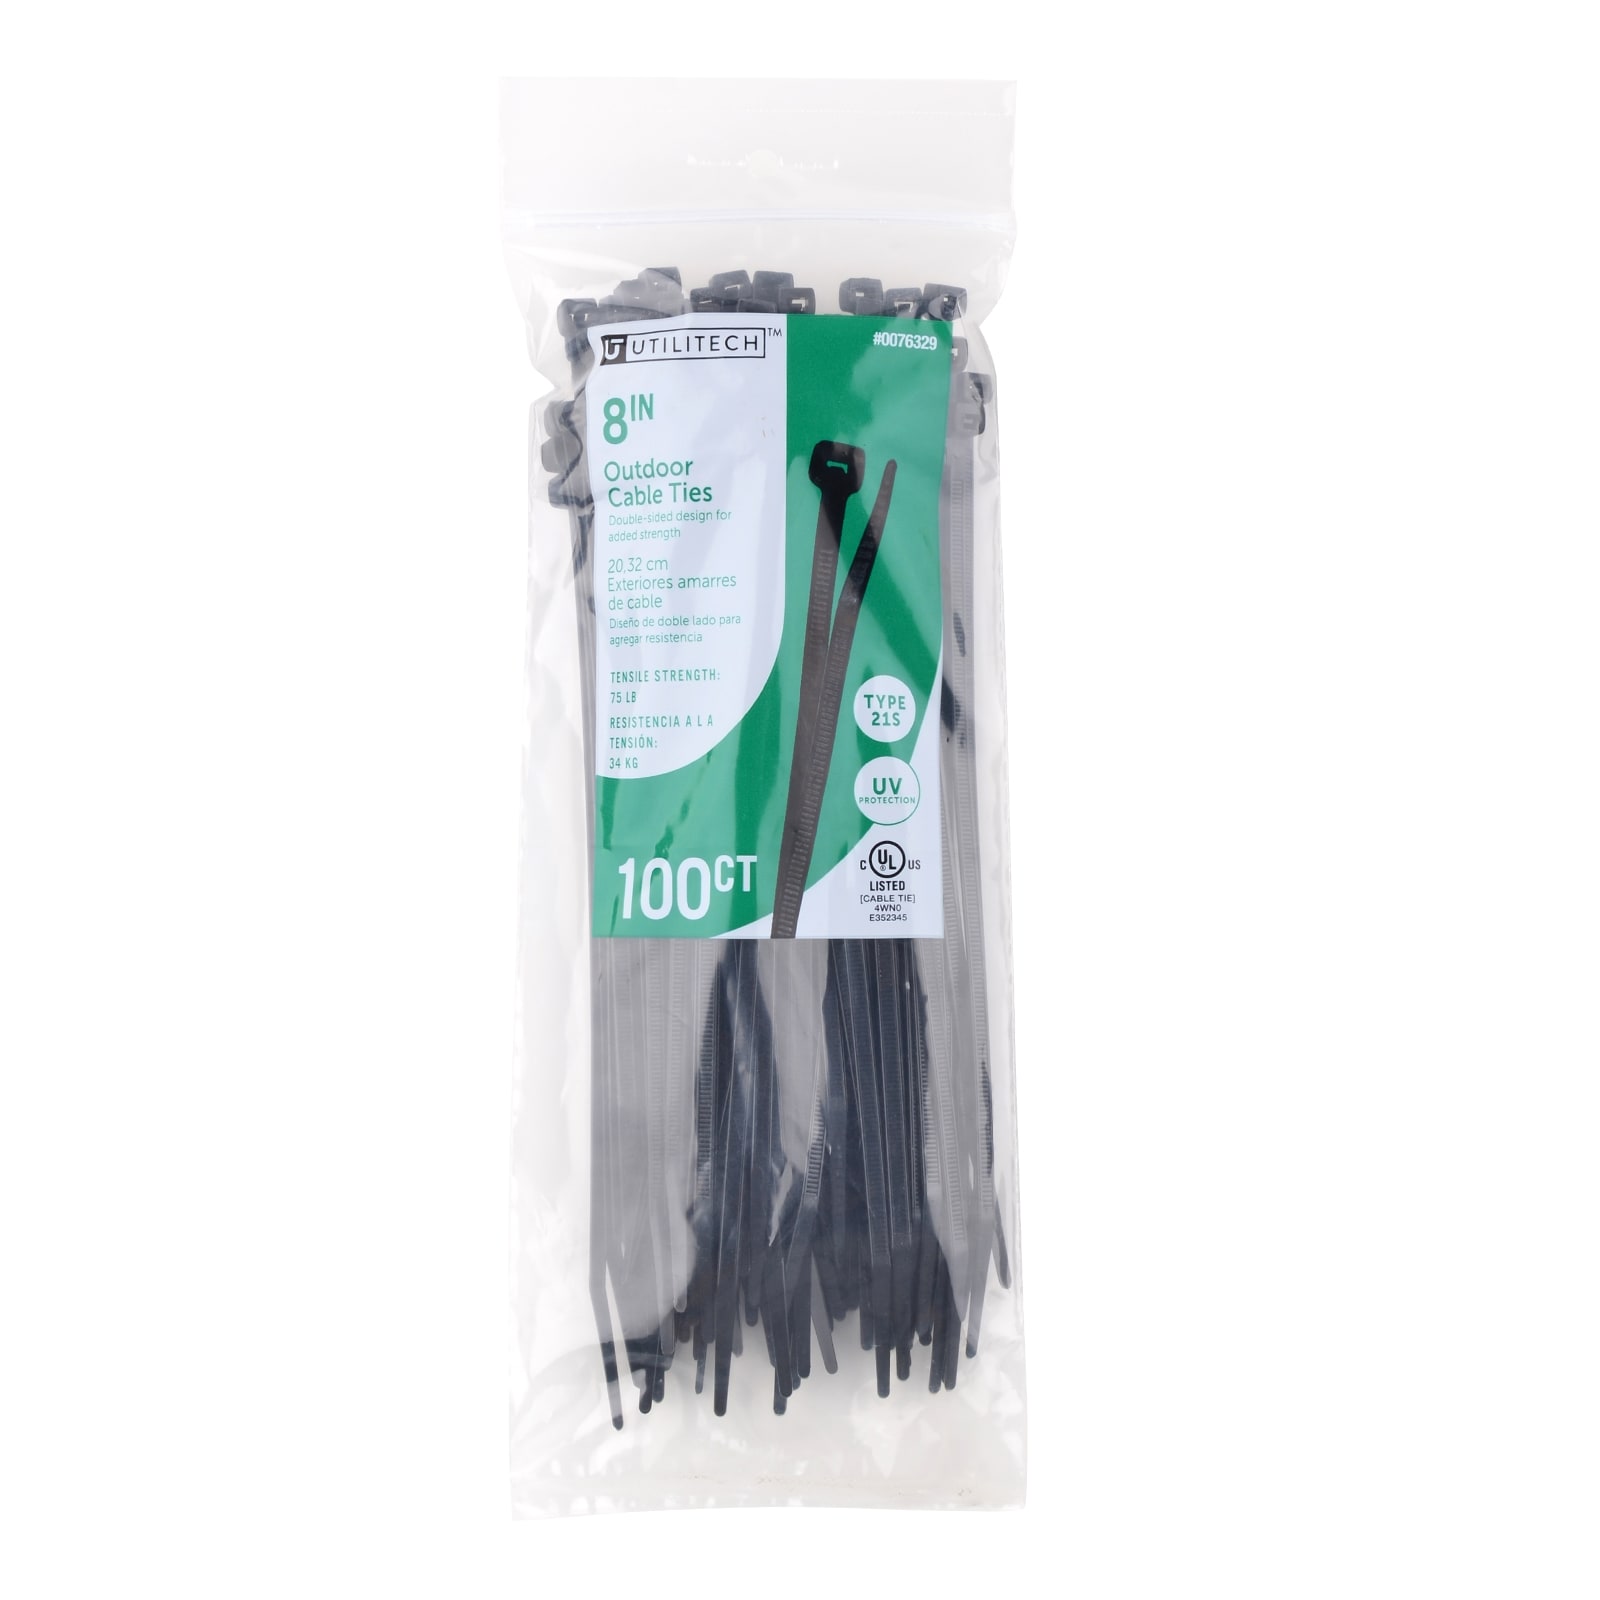 CABLE TIES WHITE OR BLACK PLASTIC UV RESISTANT BAGS OF 100 